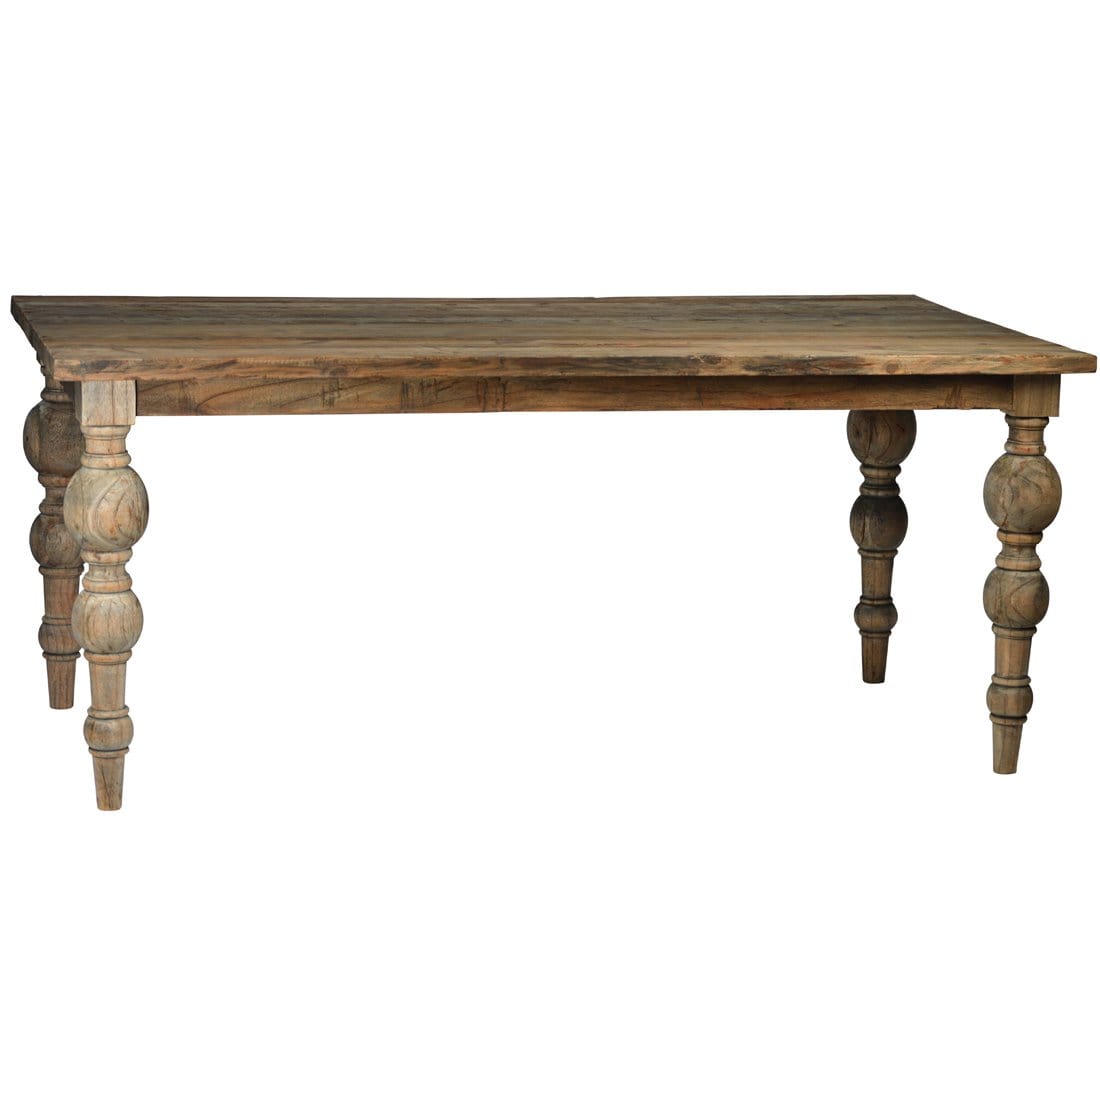 Dovetail Campbell Dining Table Furniture dovetail-DOV7707